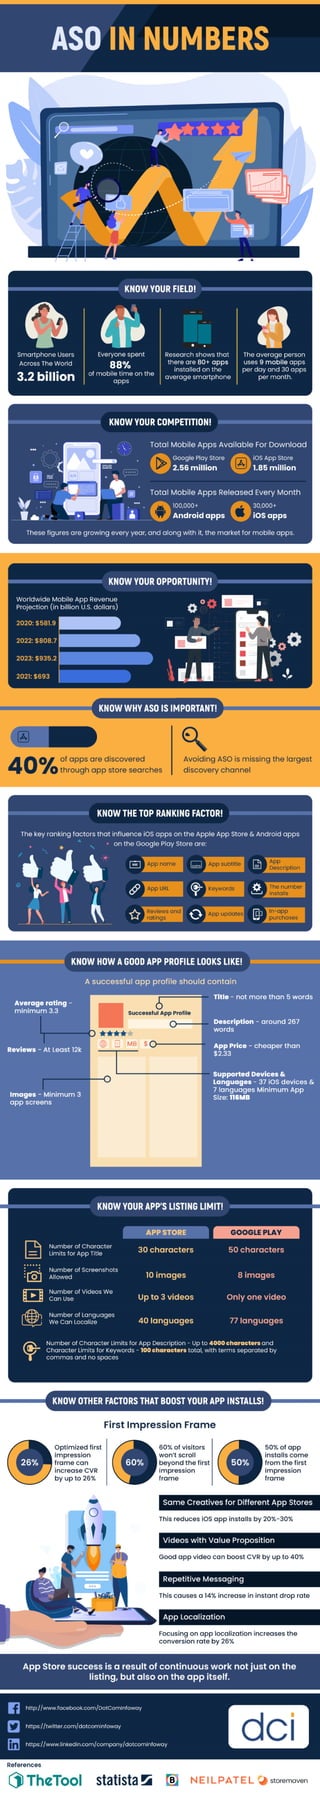 Aso in numbers [Infographic]